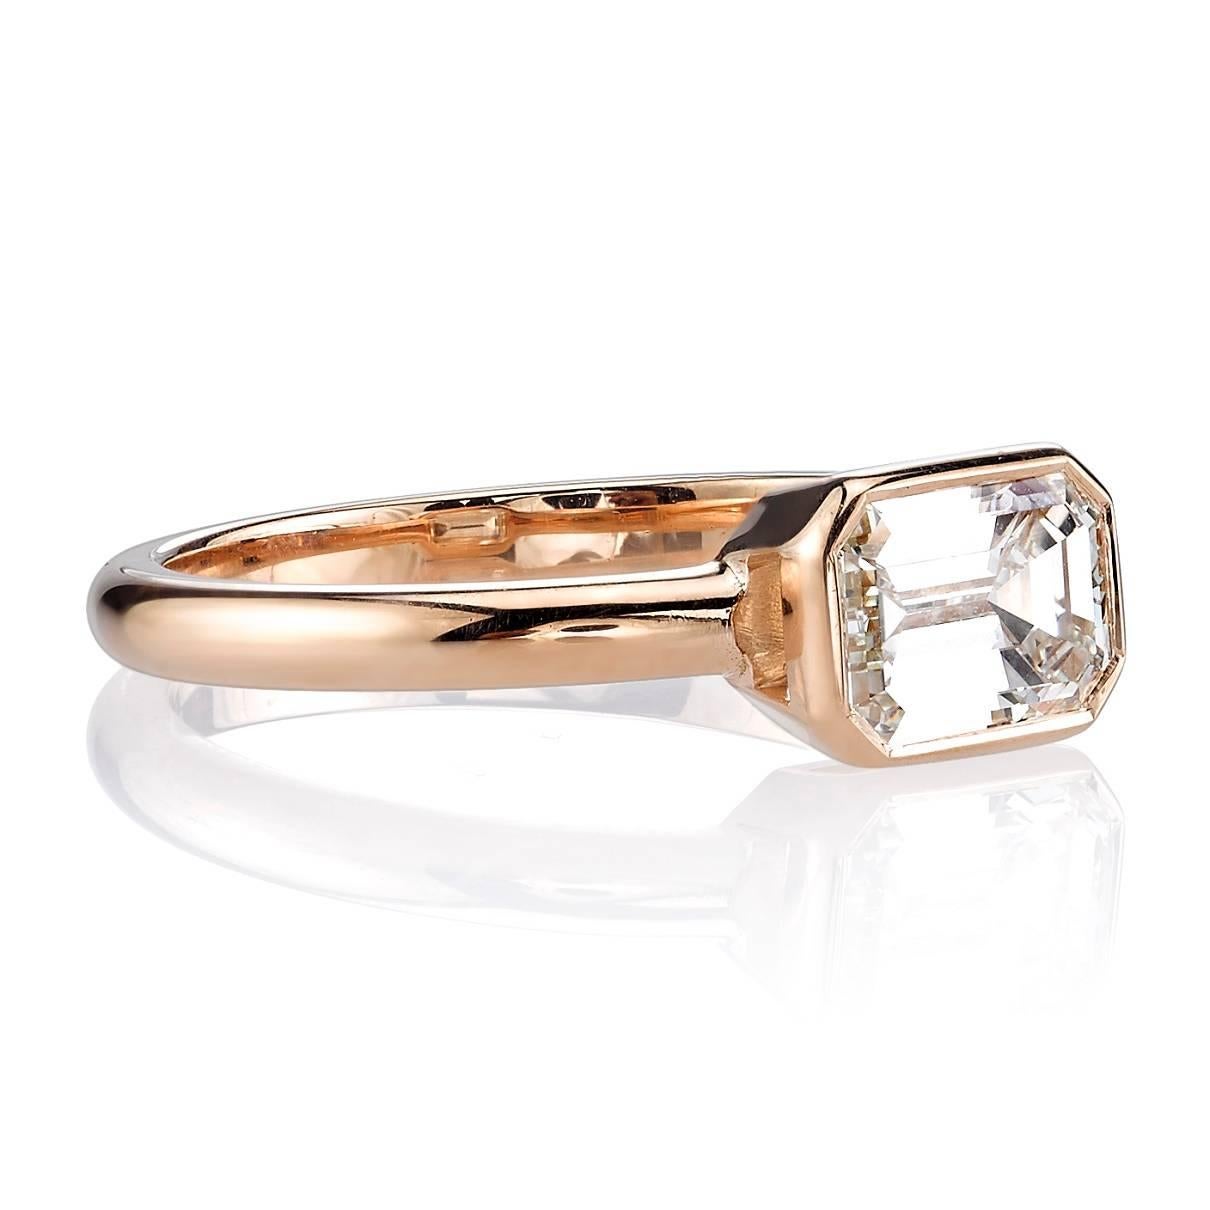 1.26ct K/VVS1 HRD certified Emerald cut diamond set in a handcrafted 18k rose gold setting. A unique take on a solitaire design.